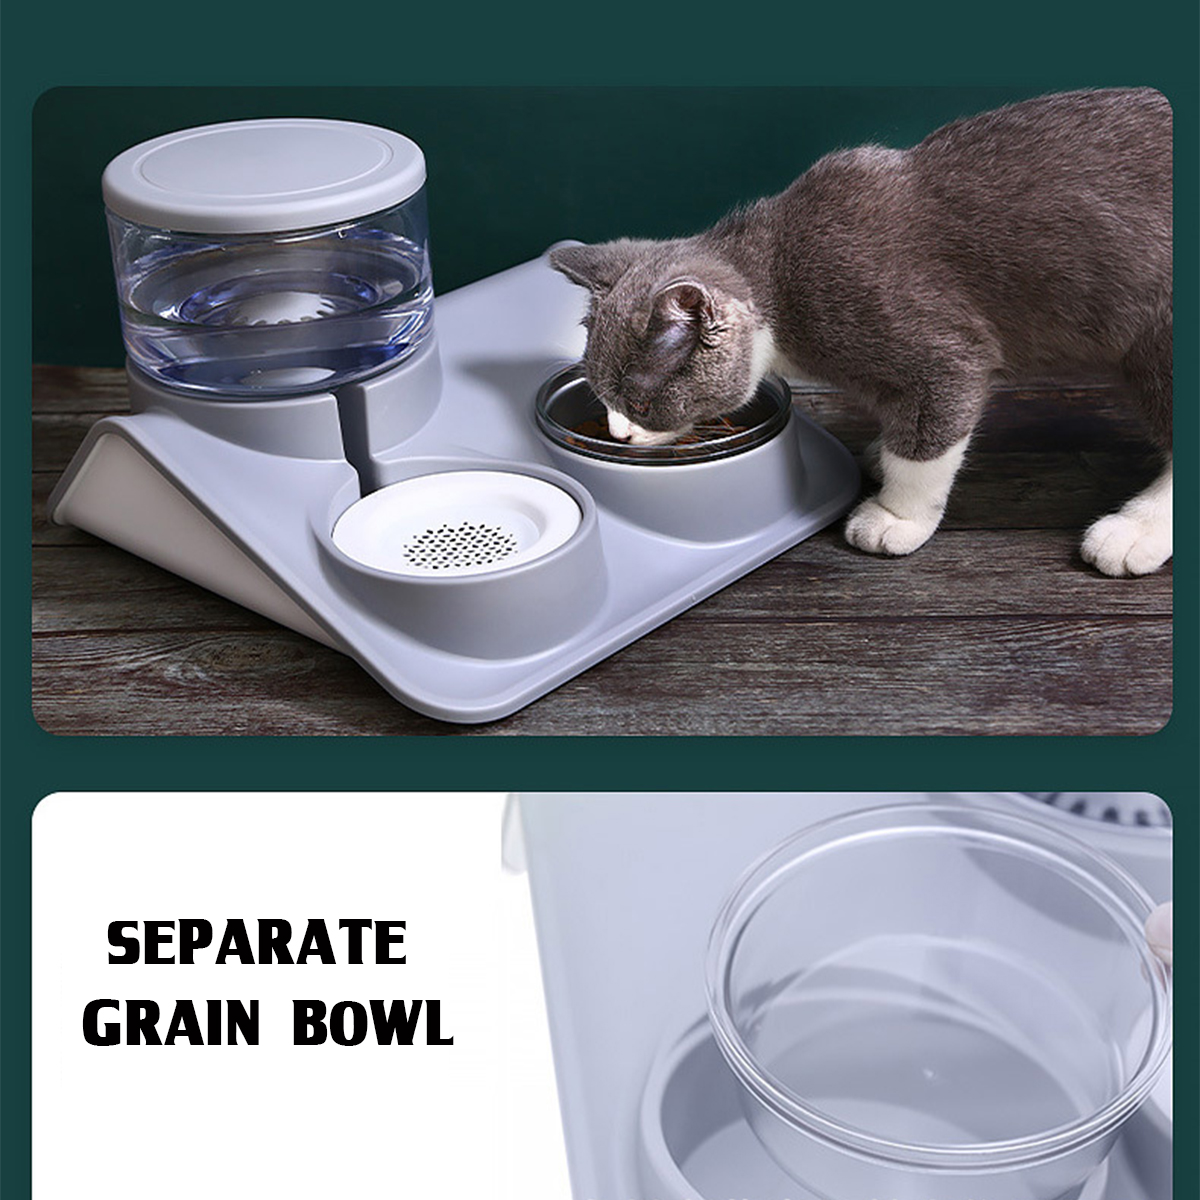 Pet-Waterer-Multi-Layer-Filter-Sealed-Cat-Bowl-2L-Pet-Bowl-for-Automatic-Cat-Drinking-and-Feeding-De-1912352-6